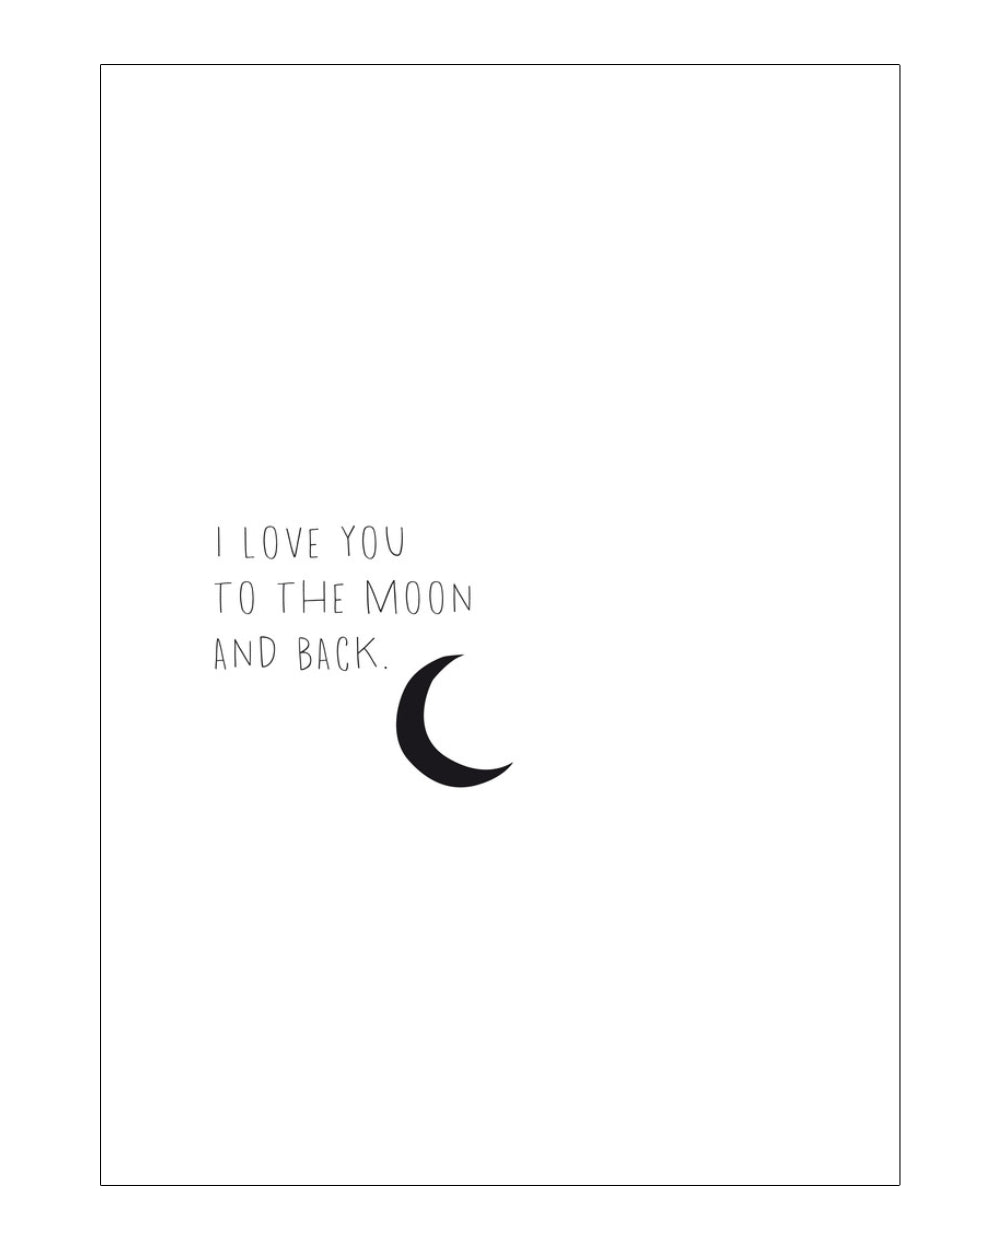 Papier Ahoi - Postkarte "I love you to the moon and back."